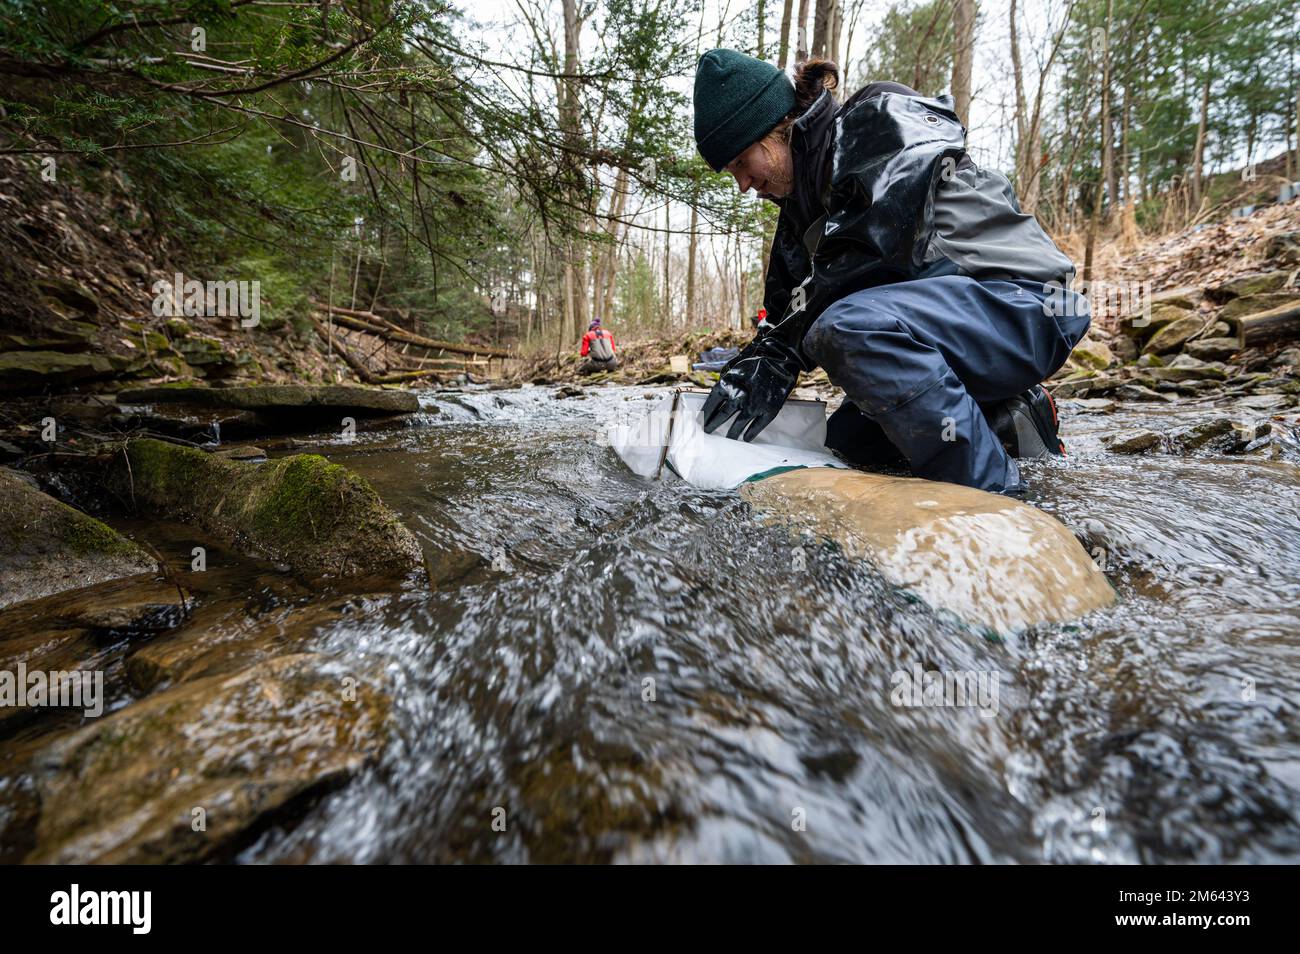 Destinee Davis, a biologist with the water quality team for the U.S. Army Corps of Engineers Pittsburgh District, collects water samples and surveys macroinvertebrates in a tributary flowing into Crooked Creek Lake located near Ford City, Pennsylvania, March 30, 2022. The water quality team collects samples around the various reservoirs belonging to the Pittsburgh District every spring to determine the water quality in the region. Stock Photo